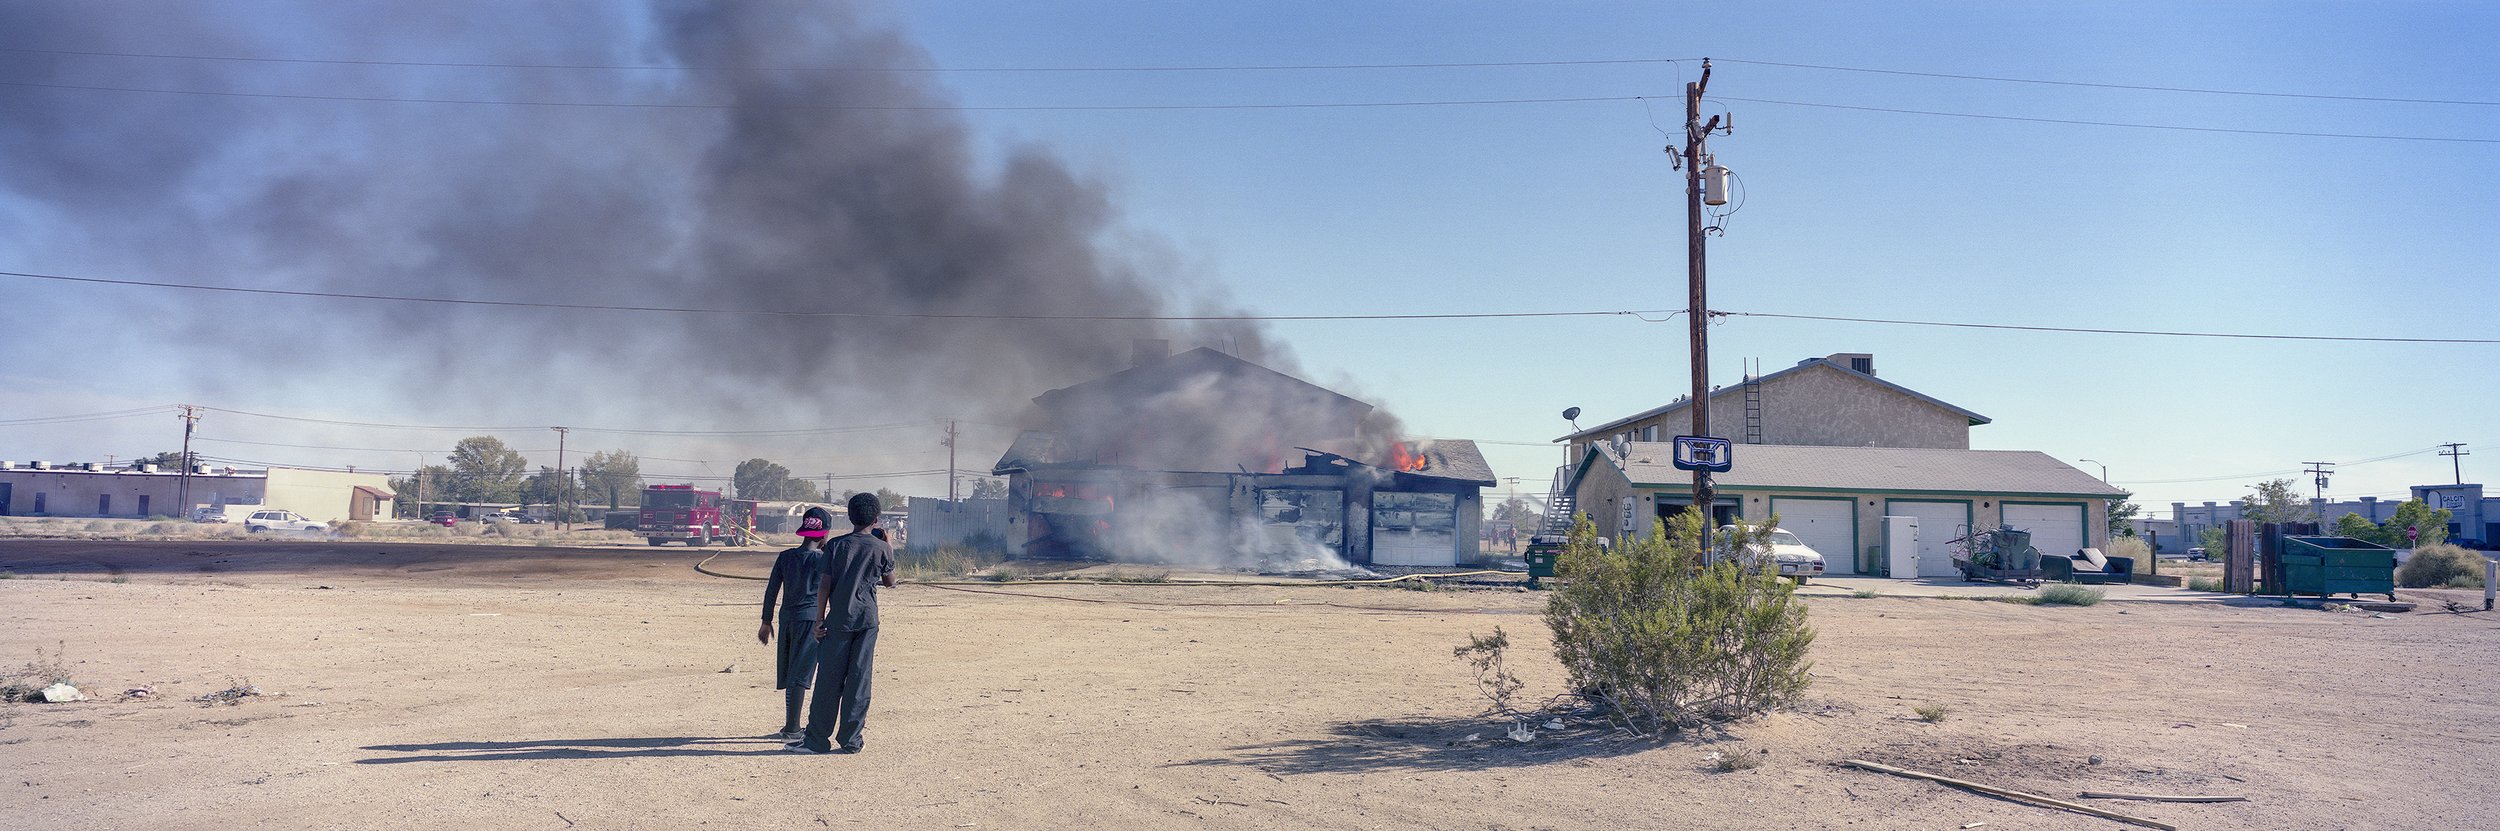   Two Boys Watching a Fire. California City. March 9, 2014  